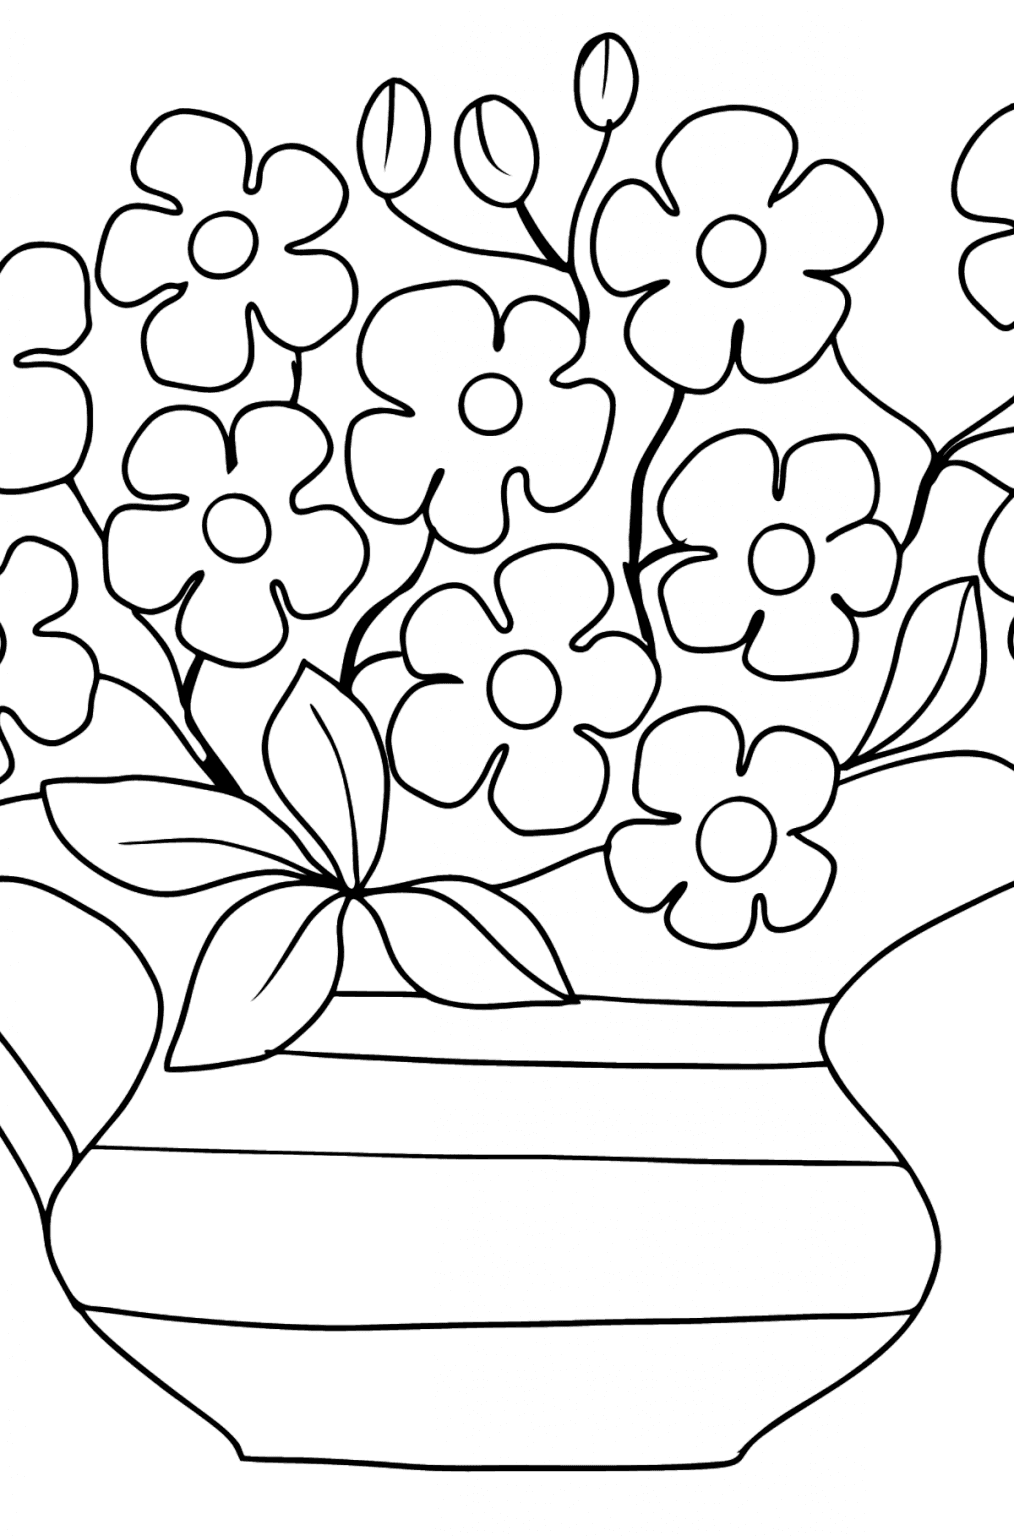 Flower Coloring Page - Forget me nots ♥ Online and Print for Free!